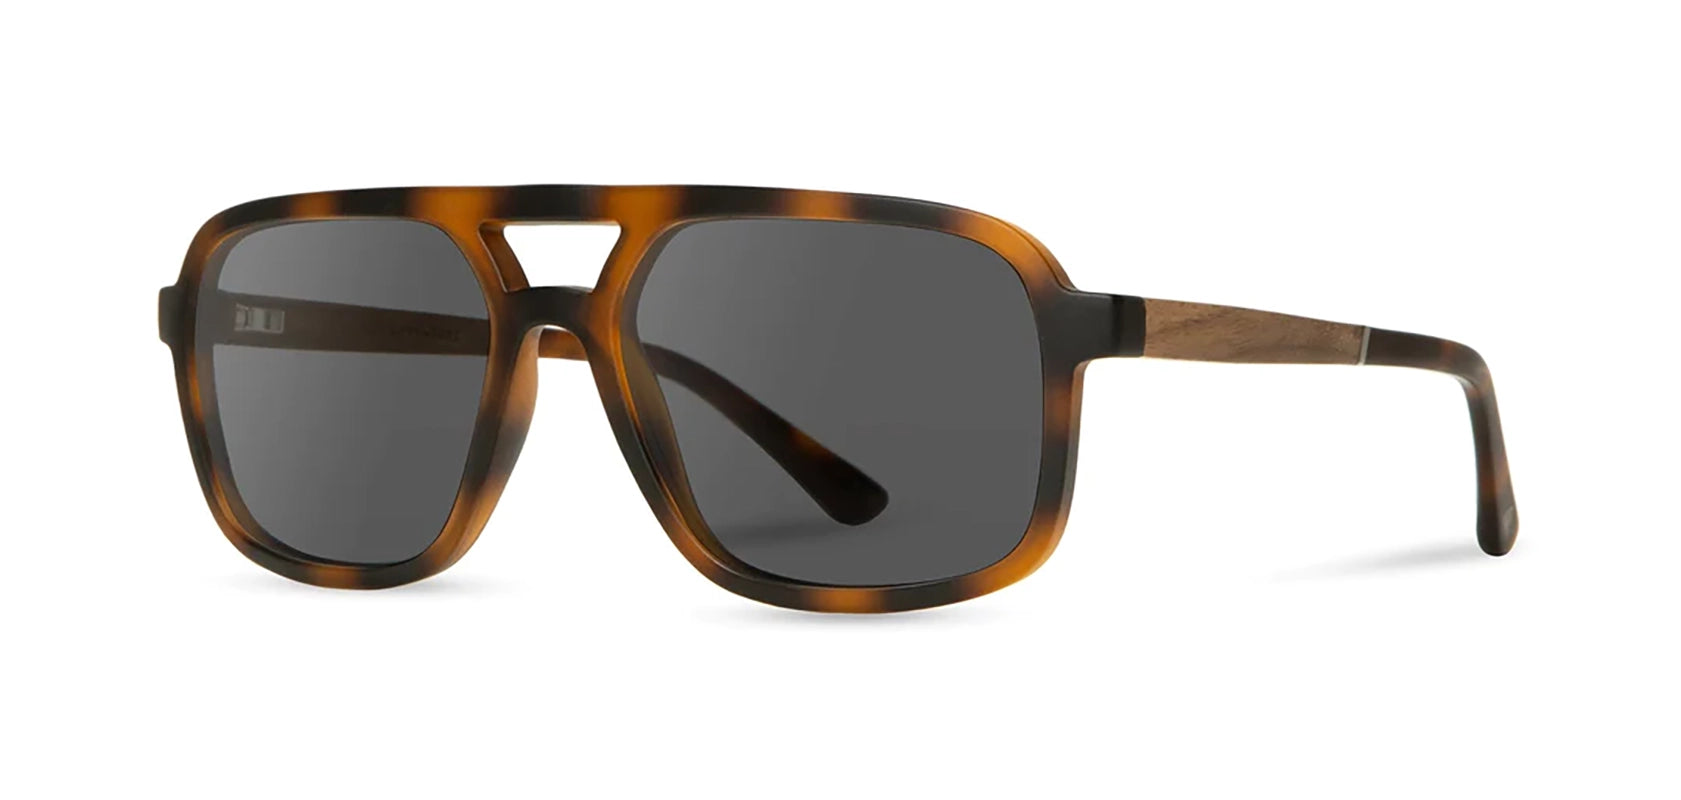 Camp Glacier Sunglasses with Matte Tortoise / walnut frames and HD+ Grey polarized lenses, front angled view